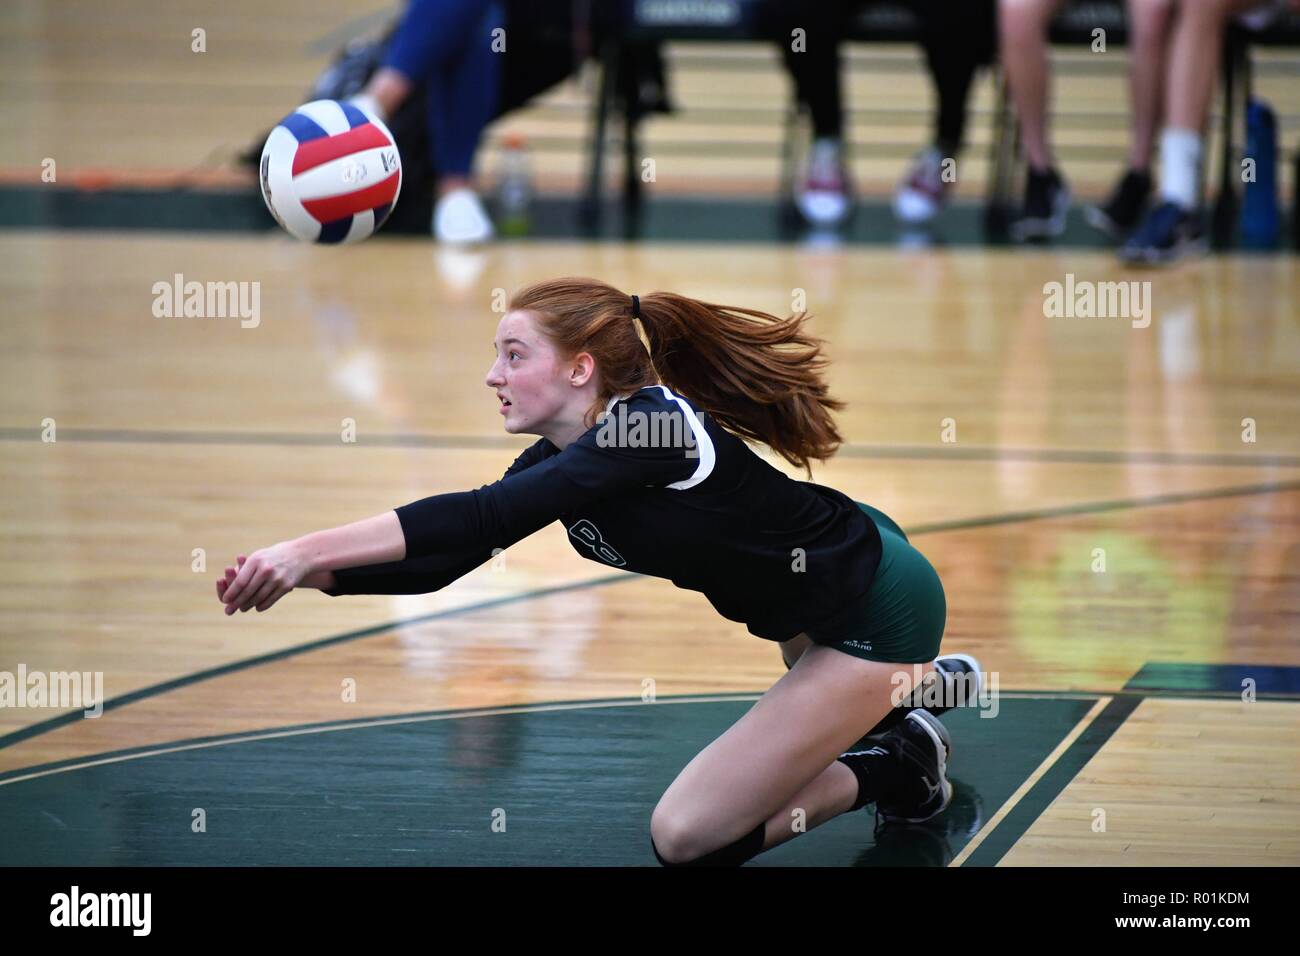 Player diving to the floor to dig an opponent's kill shot attempt. USA. Stock Photo